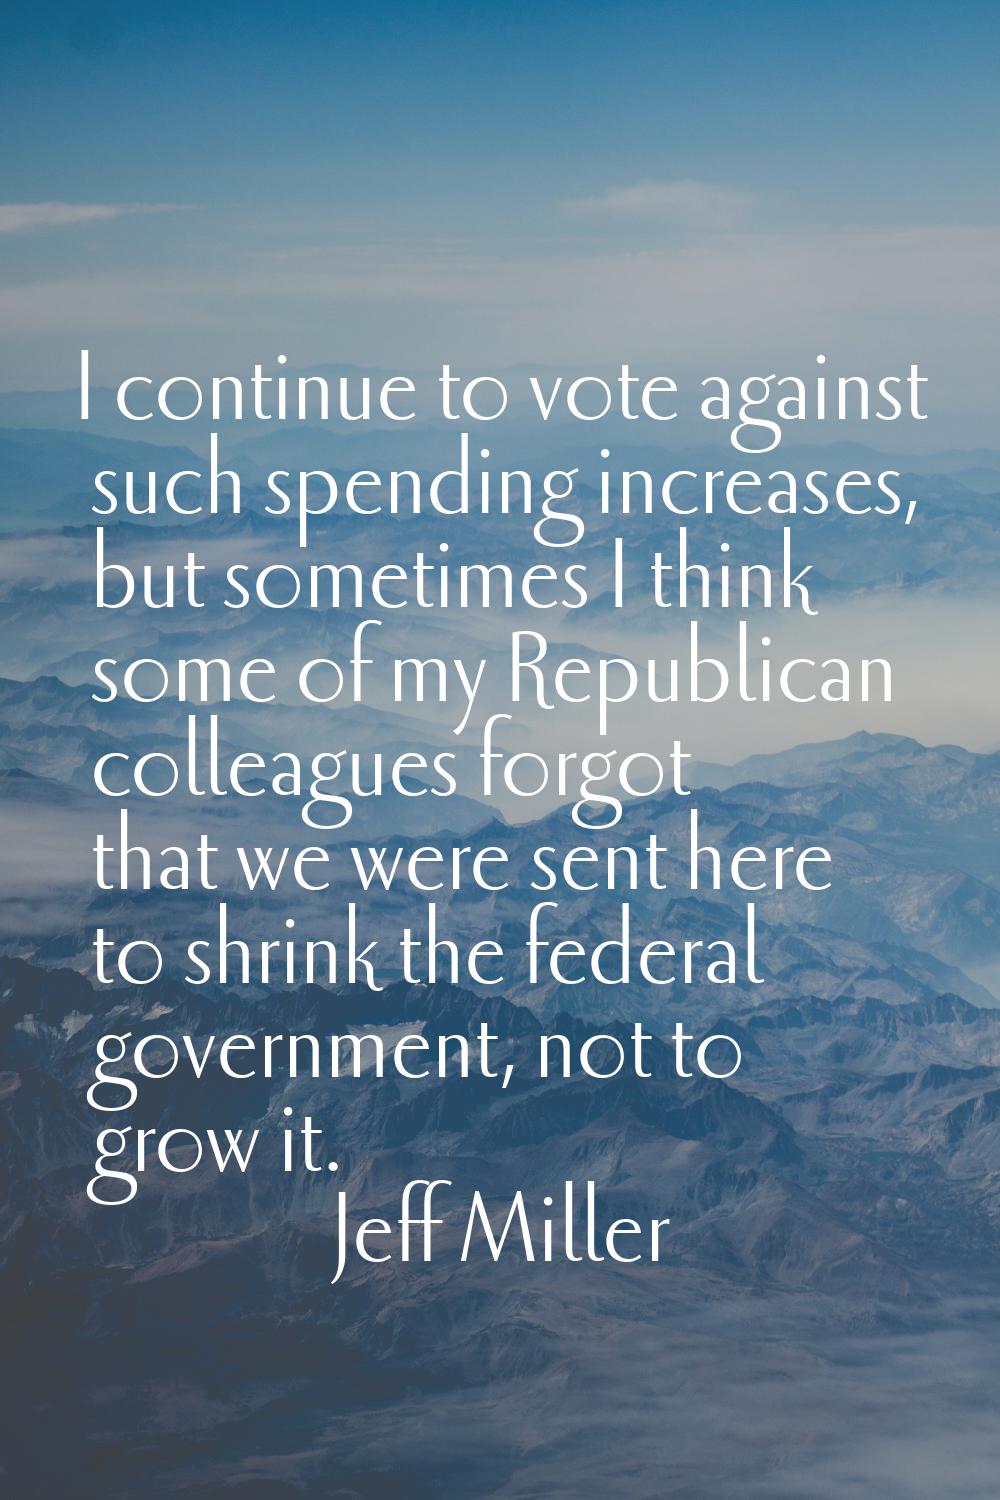 I continue to vote against such spending increases, but sometimes I think some of my Republican col